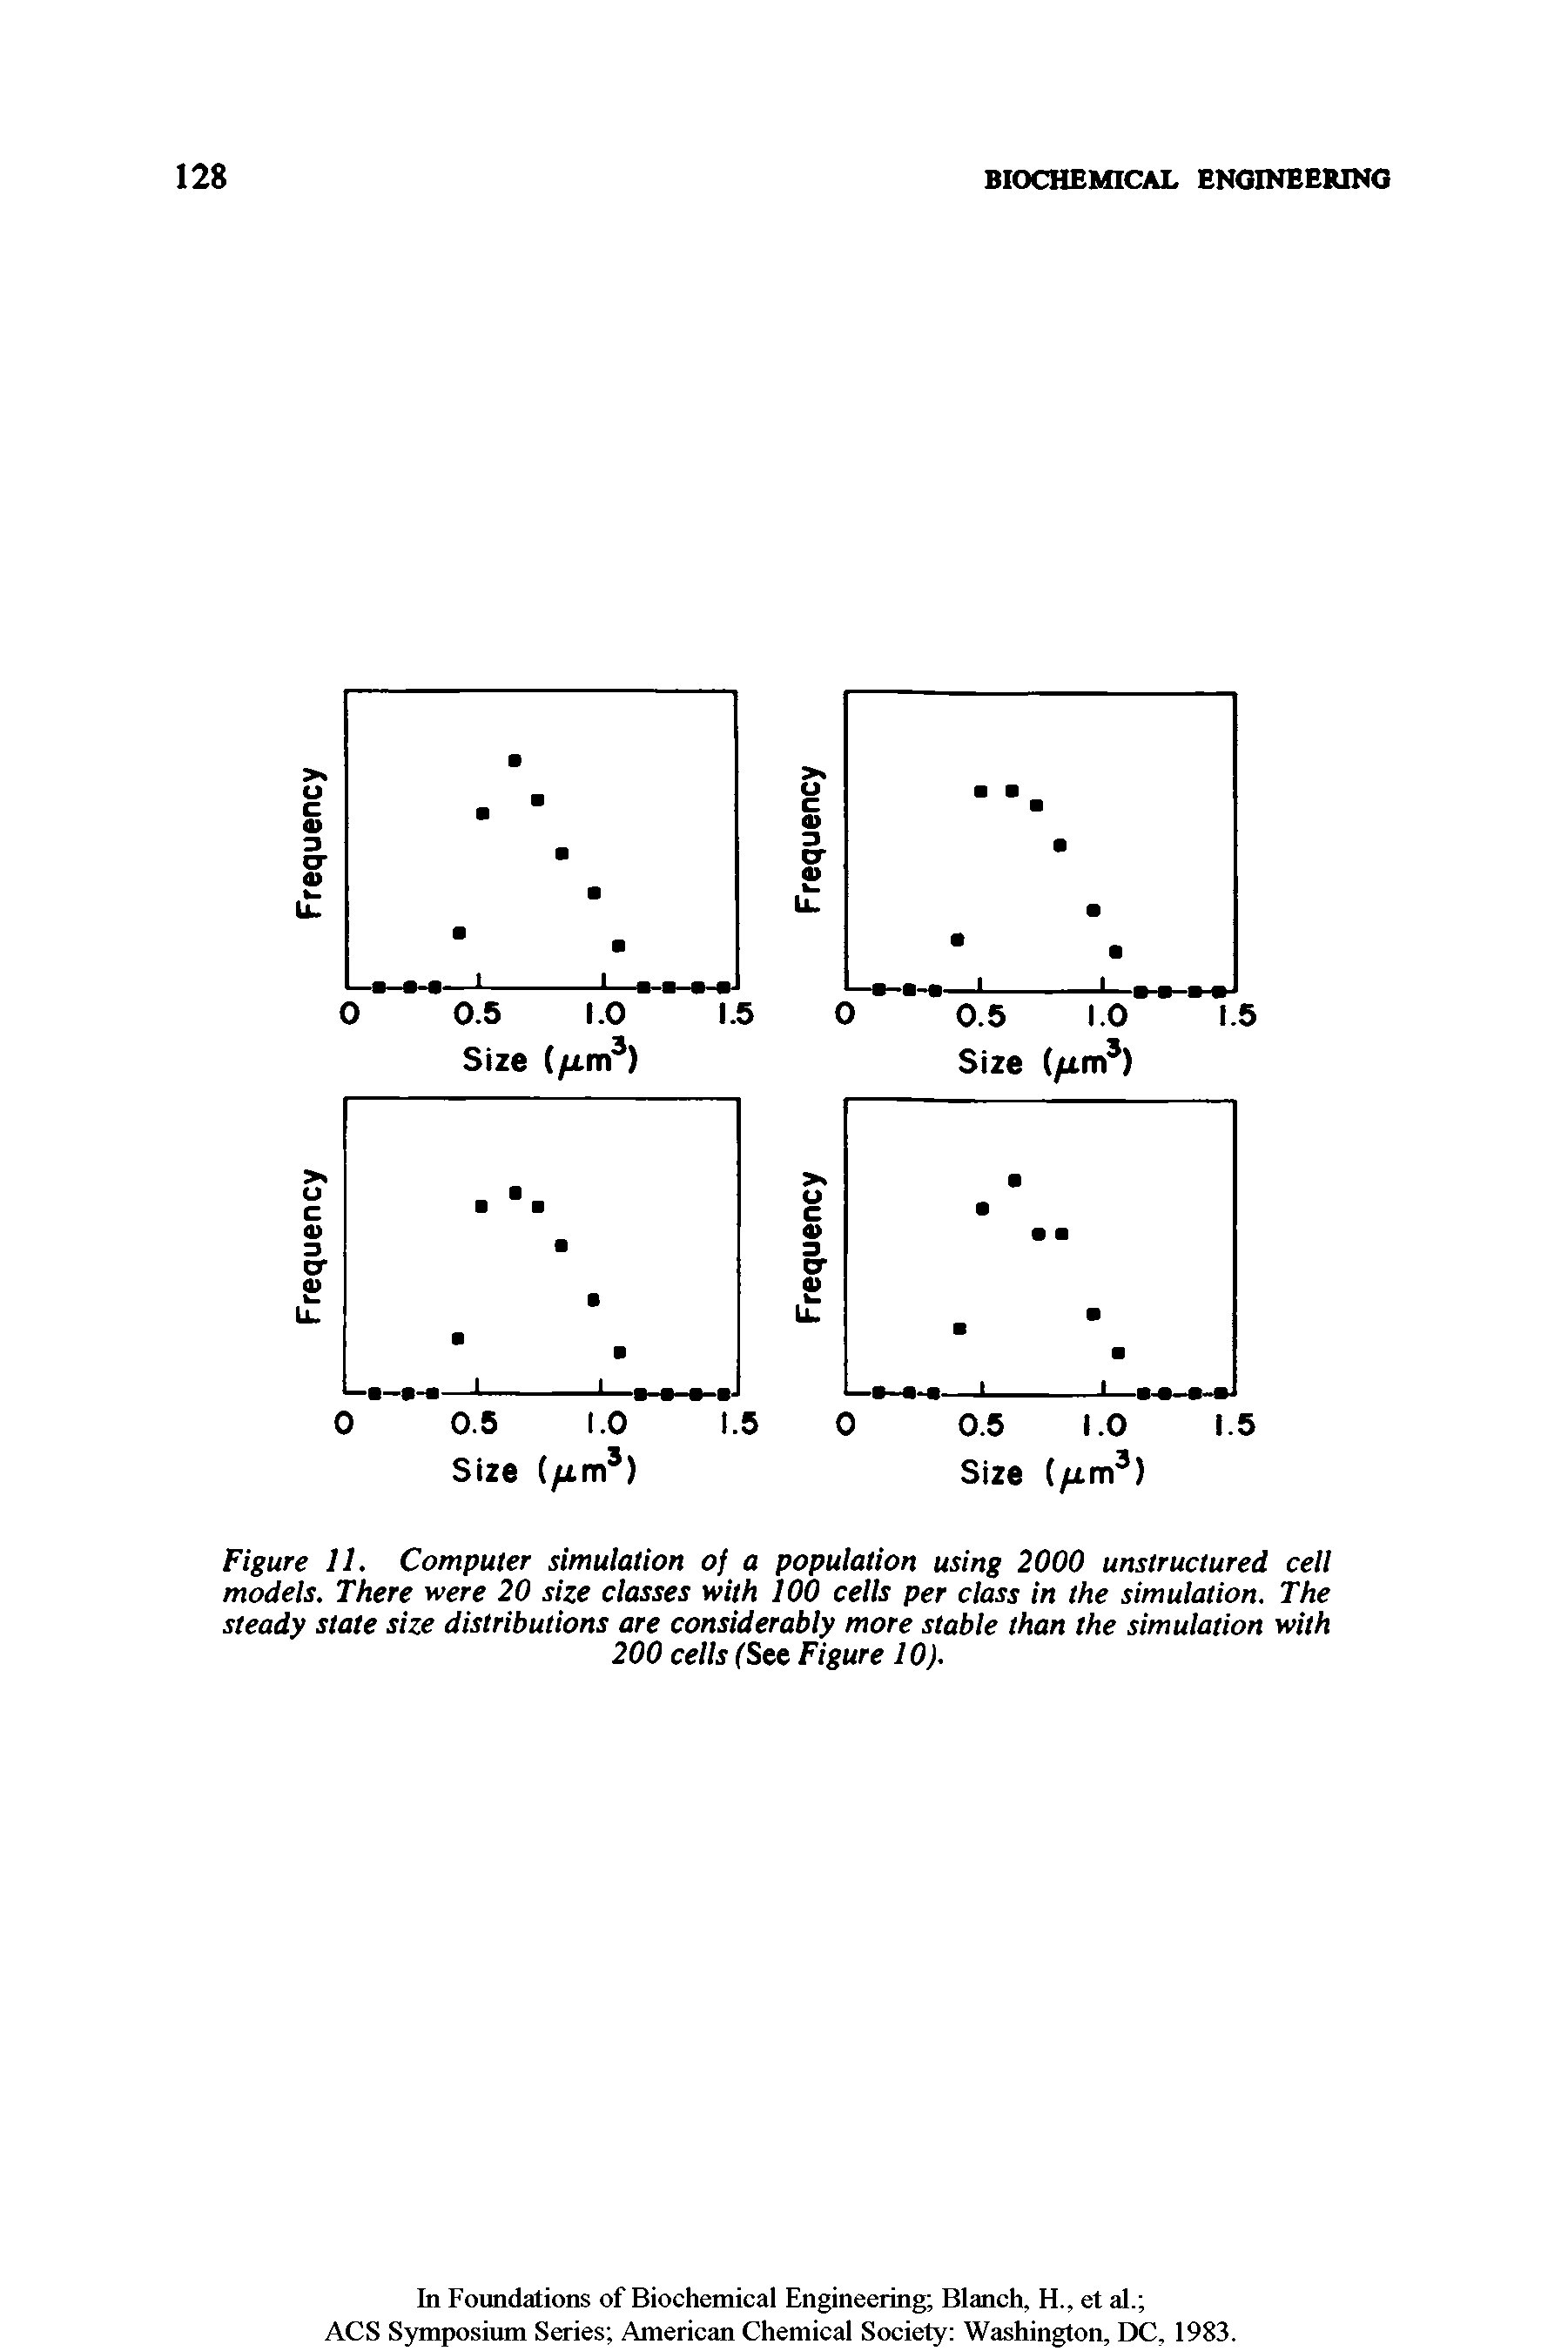 Figure 11. Computer simulation of a population using 2000 unstructured cell models. There were 20 size classes with 100 cells per class in the simulation. The steady state size distributions are considerably more stable than the simulation with 200 cells CSee Figure 10).